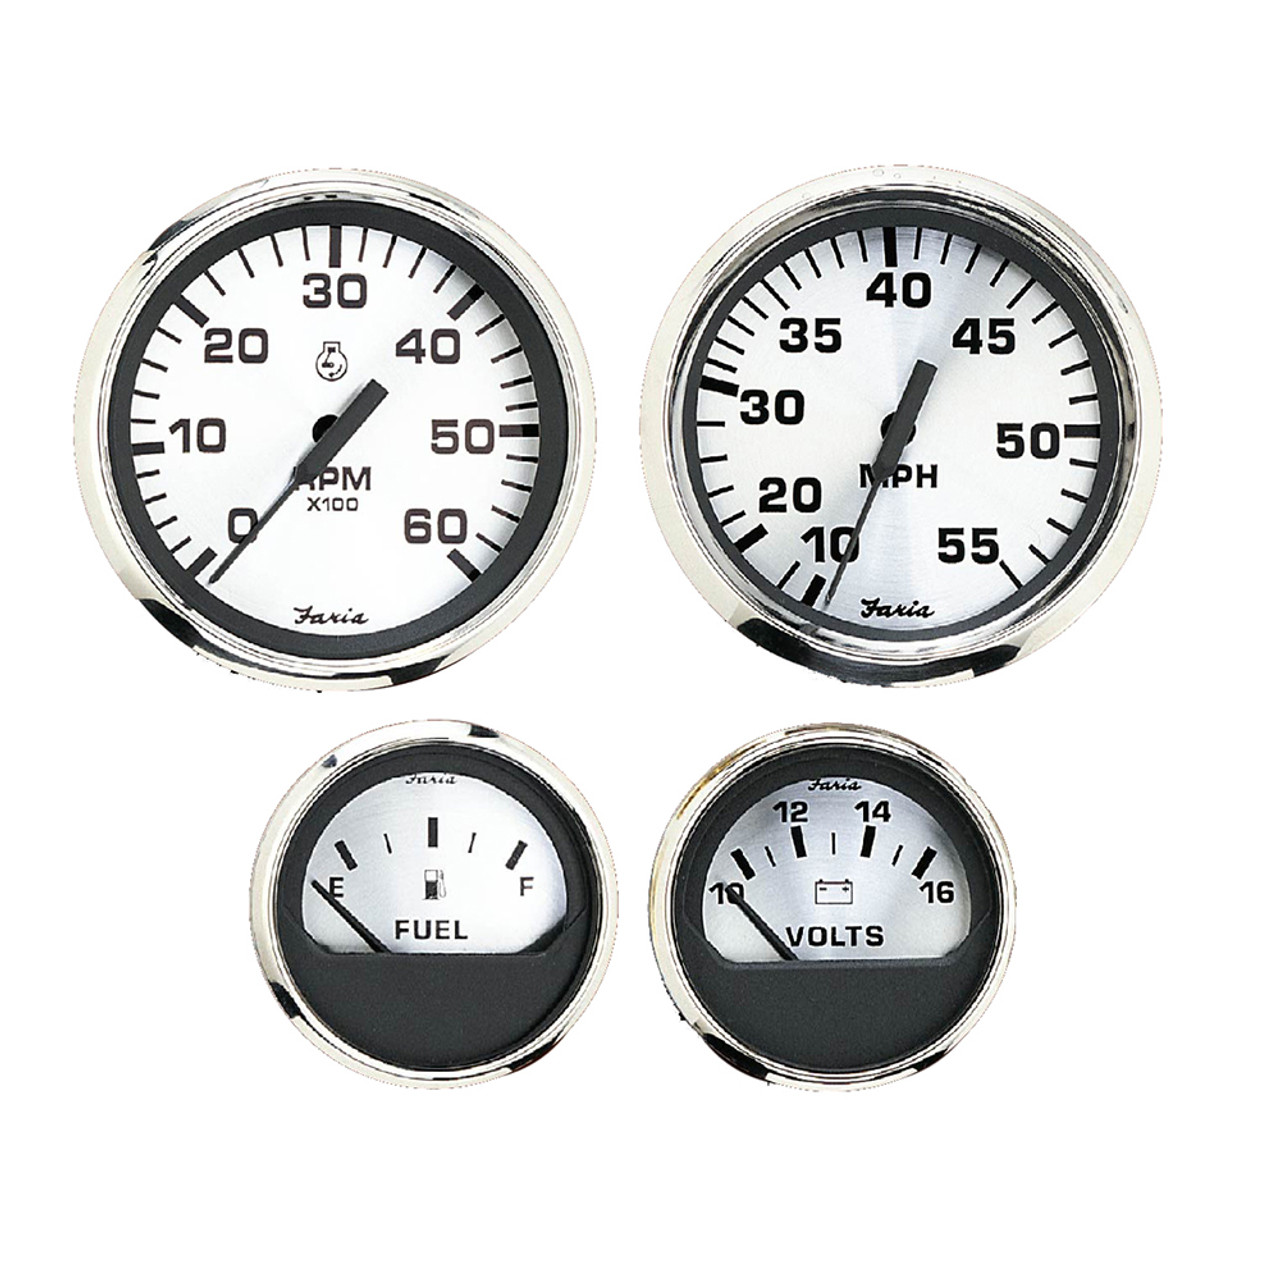 Faria Spun Silver Box Set of 4 Gauges f/Outboard Engines - Speedometer, Tach, Voltmeter & Fuel Level